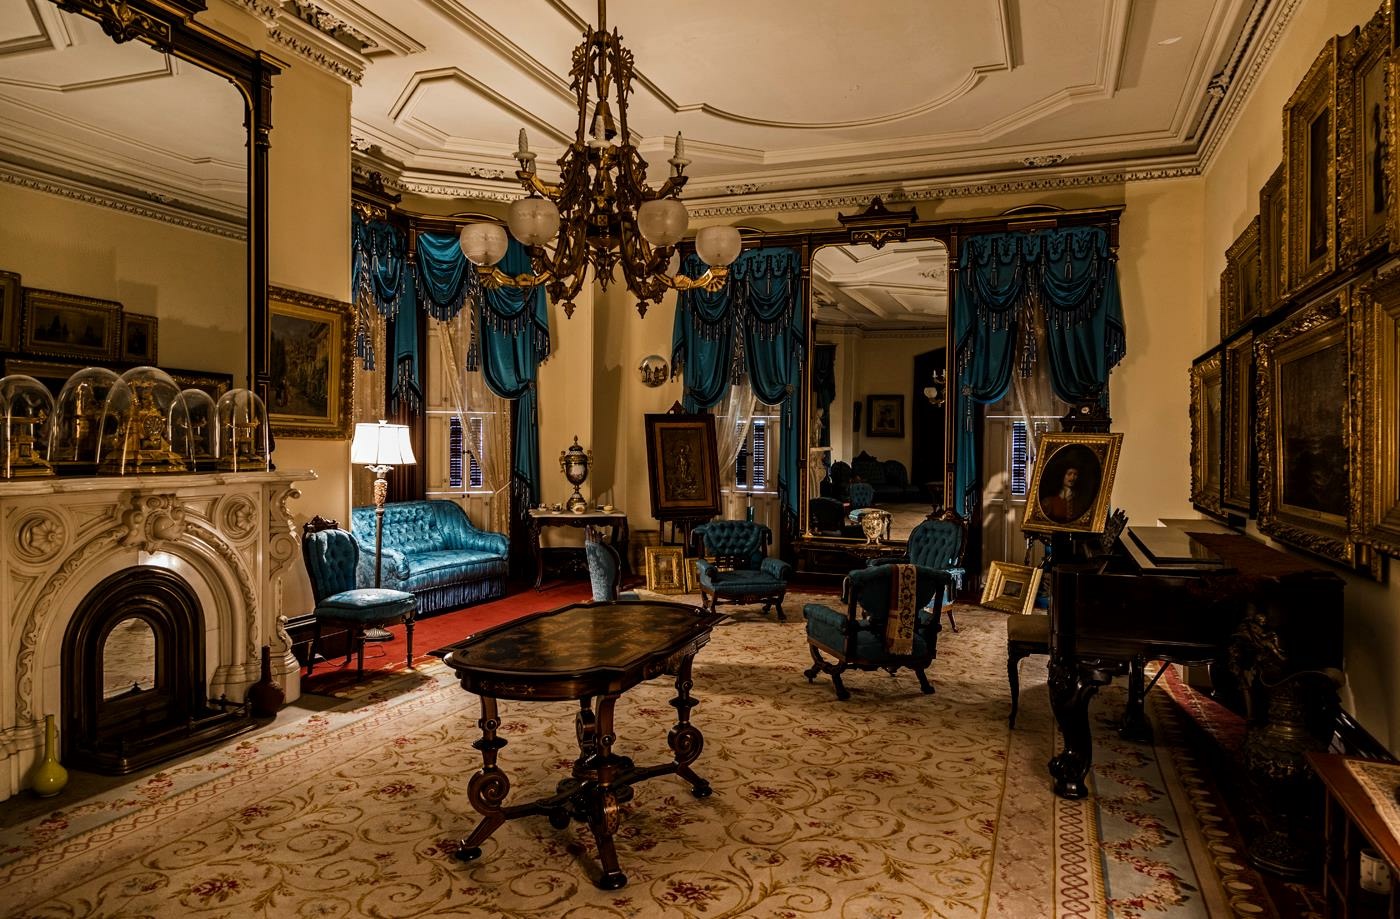 The drawing room of the Richardson-Bates House Museum, decorated with opulent Victorian furnishings.